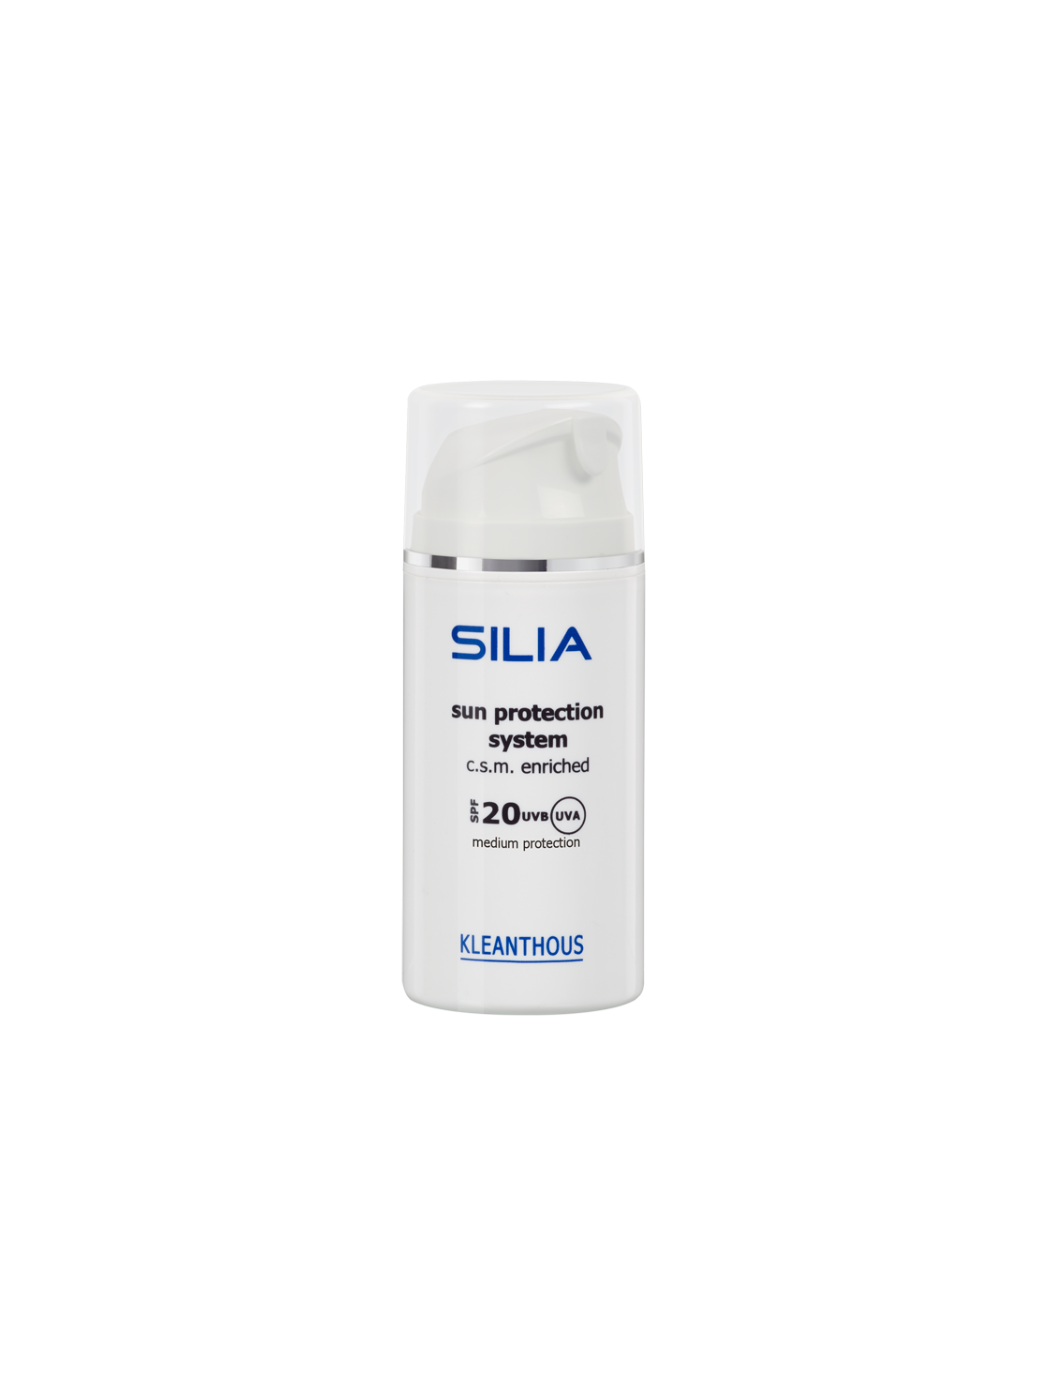 SILIA sun protection system c.s.m. enriched SPF 20 TRAVEL SIZE